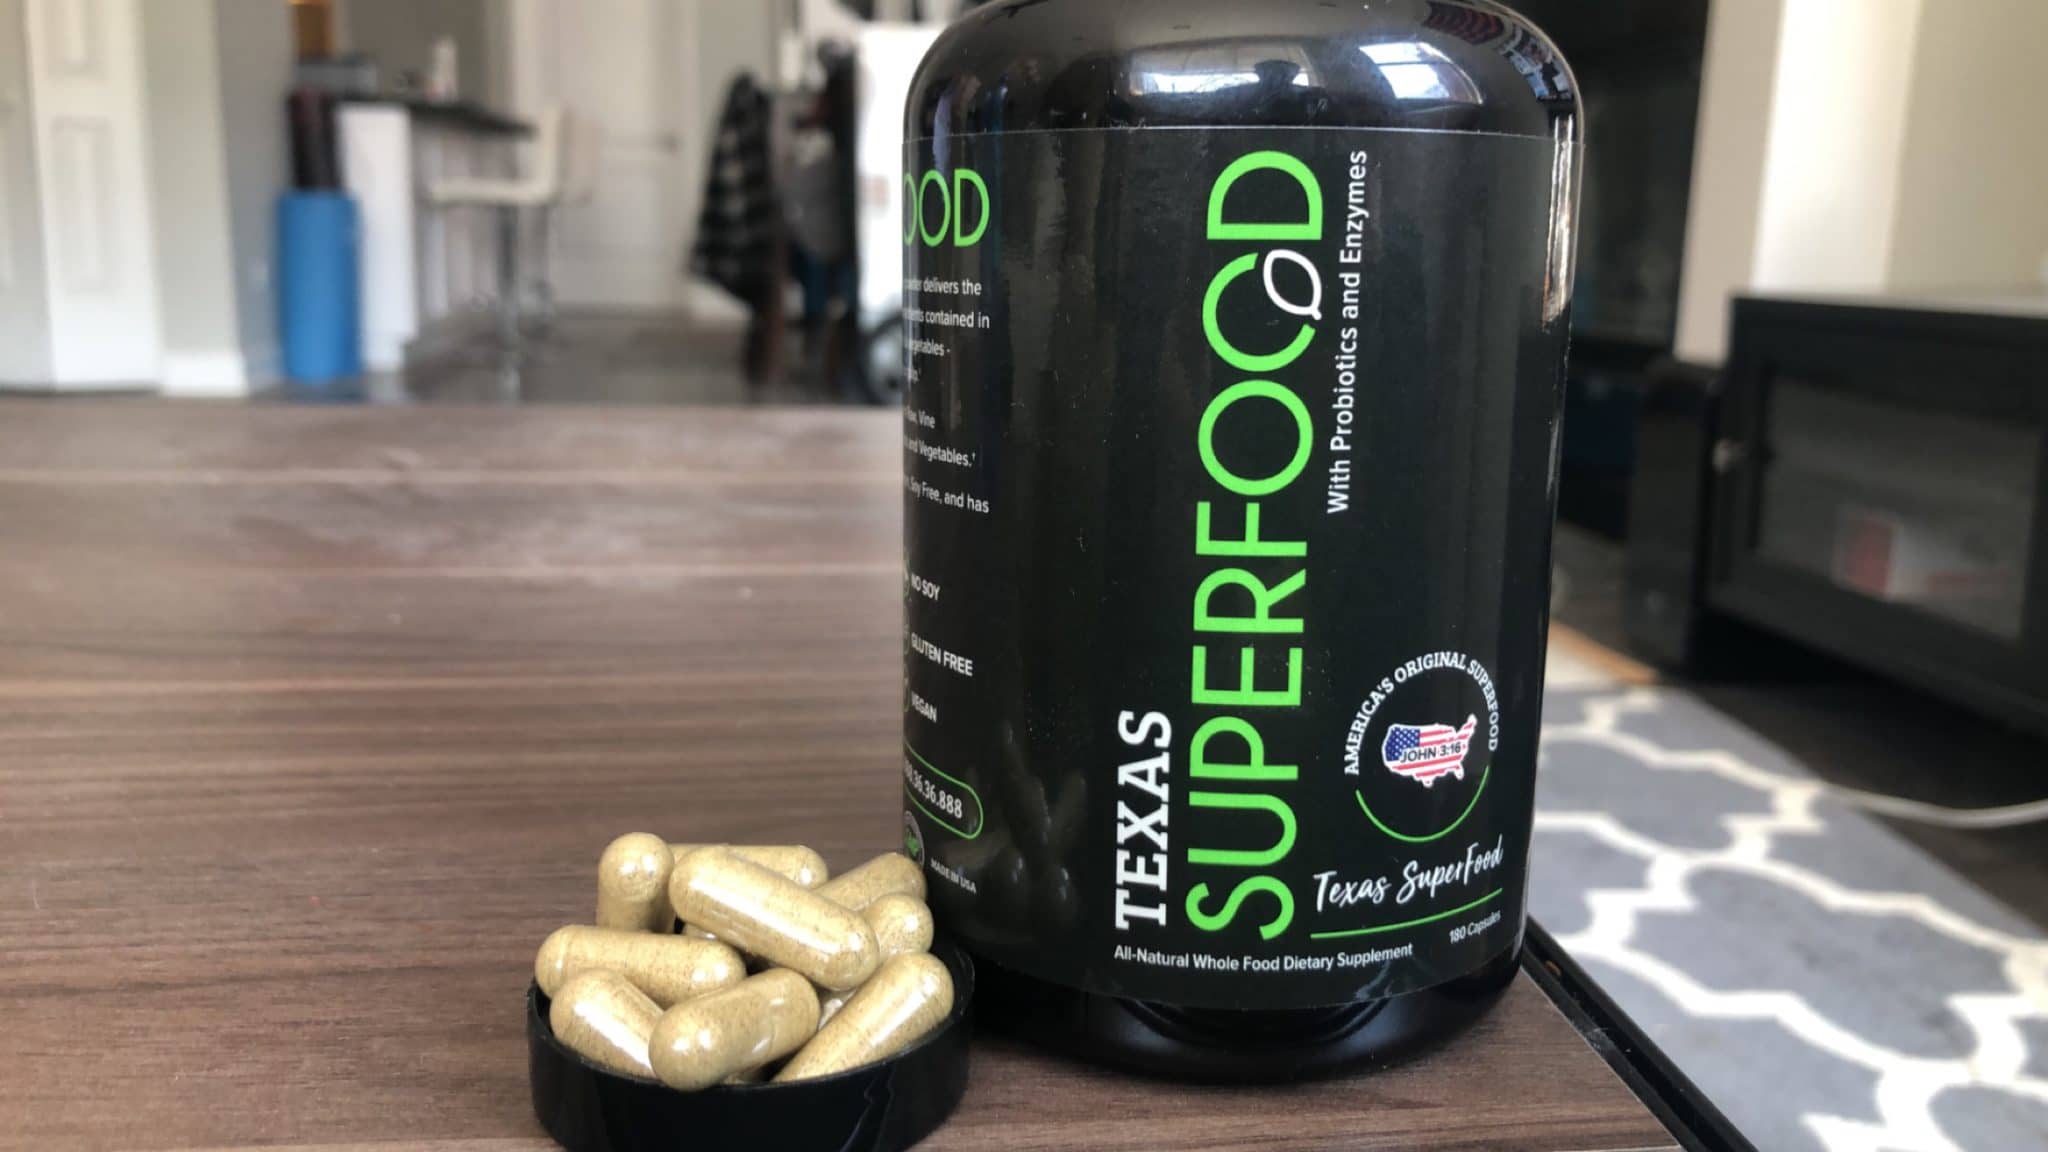 Texas Superfood supplement bottle and capsules